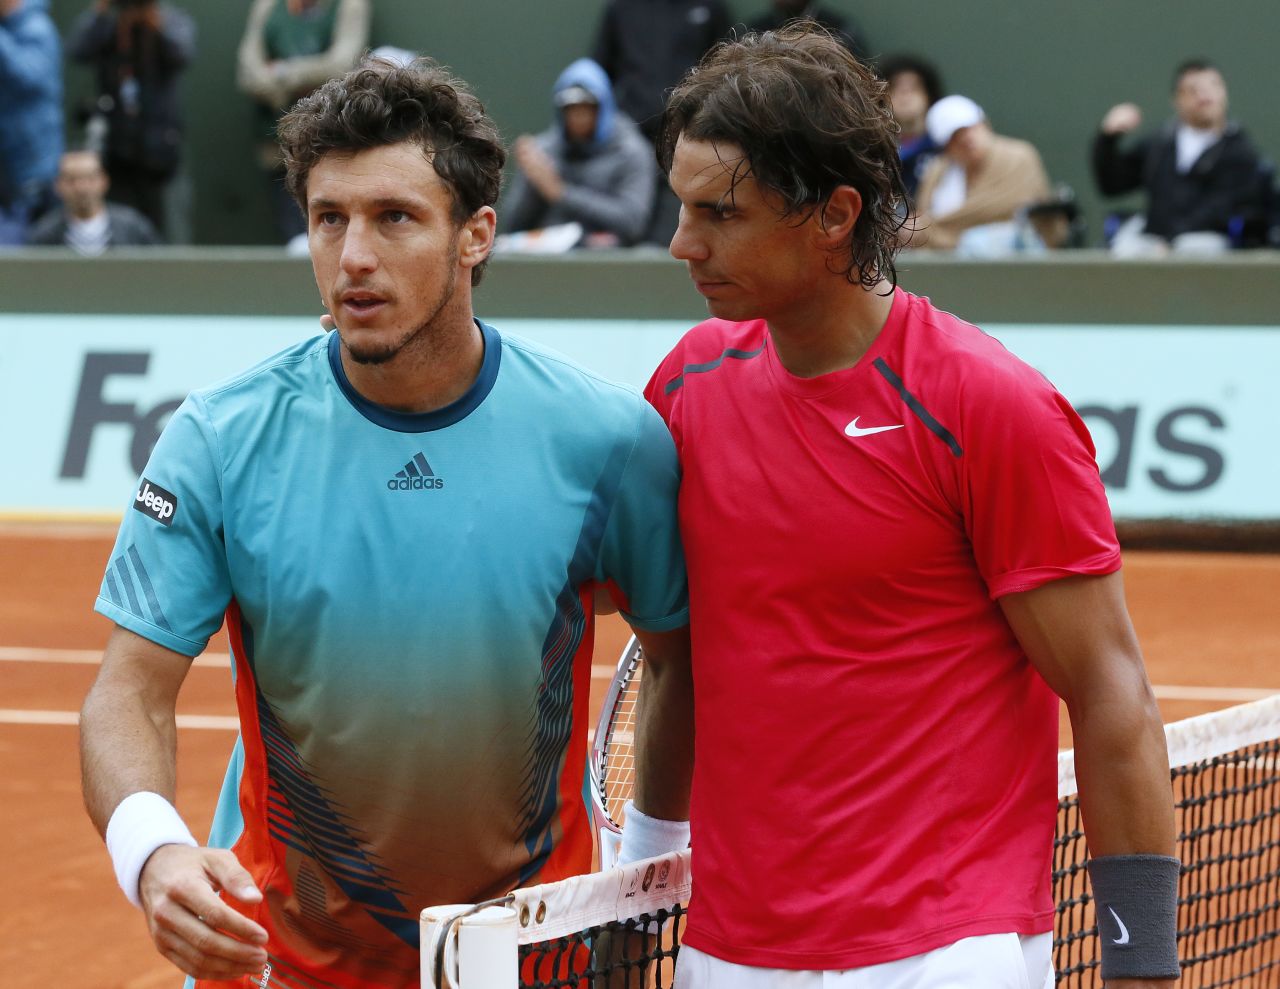 Rafael Nadal, right, was apologetic after winning 17 games in a row in his straight-sets destruction of good friend Juan Monaco in the fourth round of the French Open.